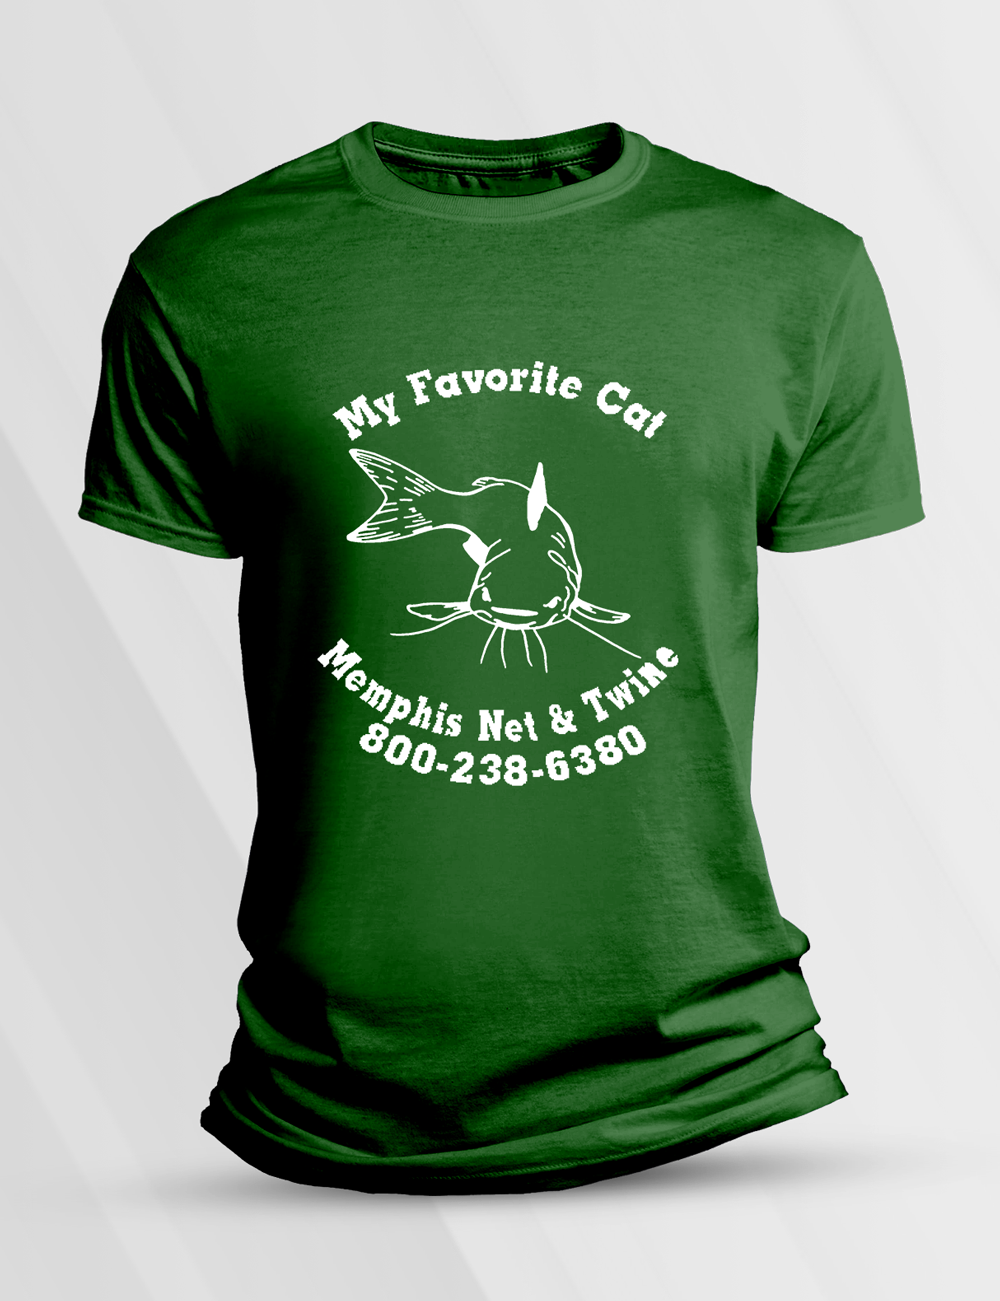 T-Shirt, Official "My Favorite Cat", Military Green